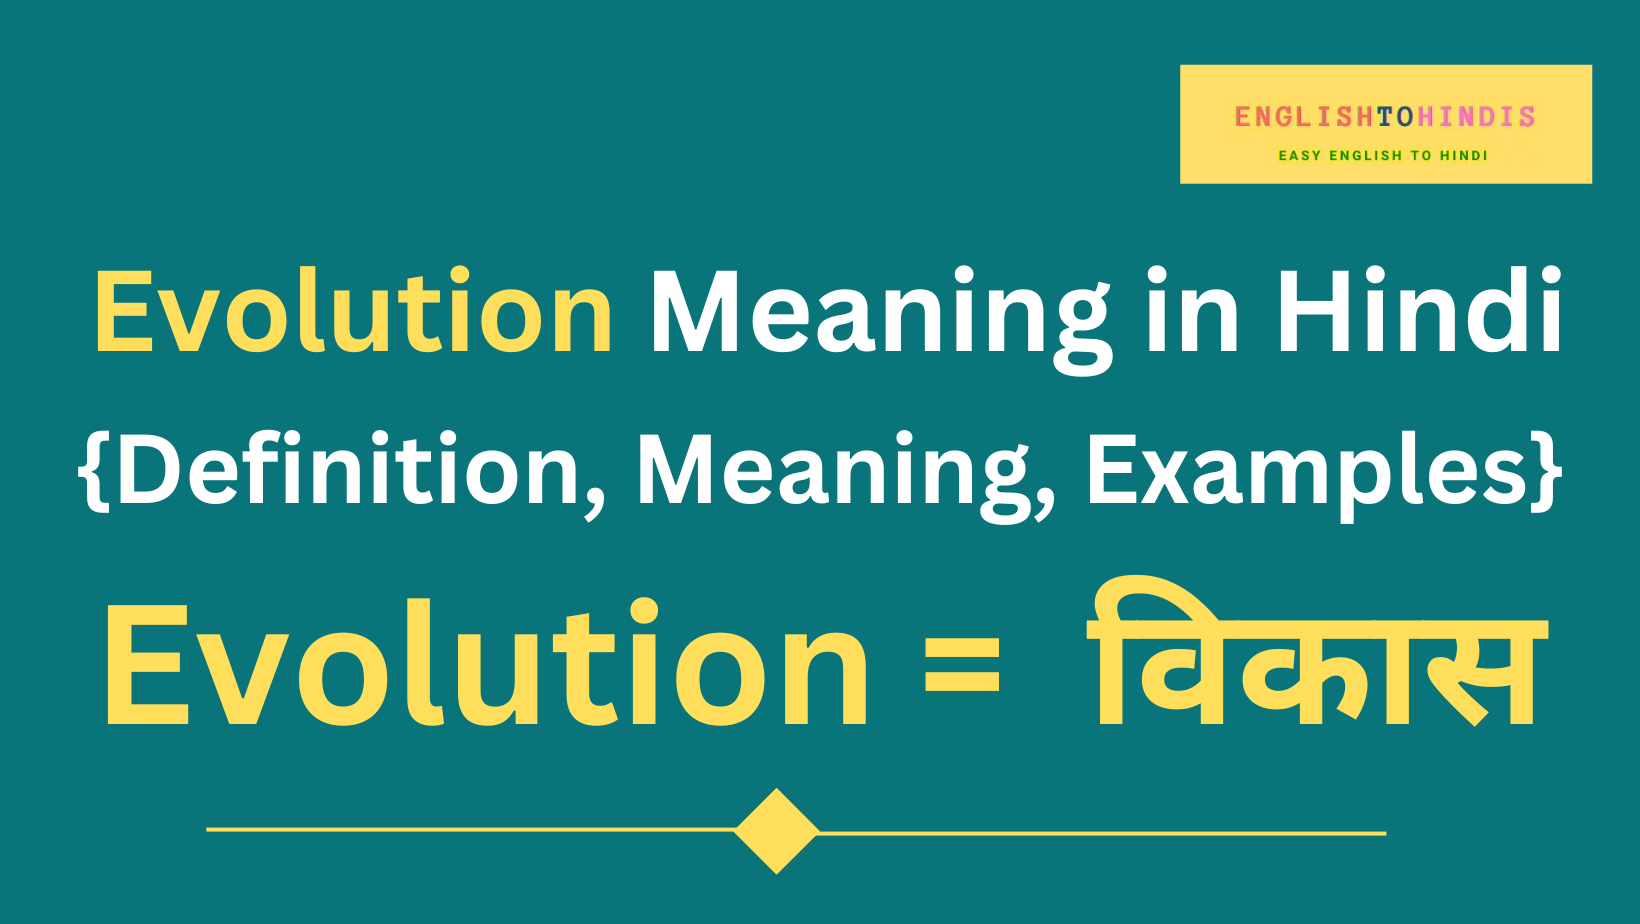 Evolution Meaning in Hindi